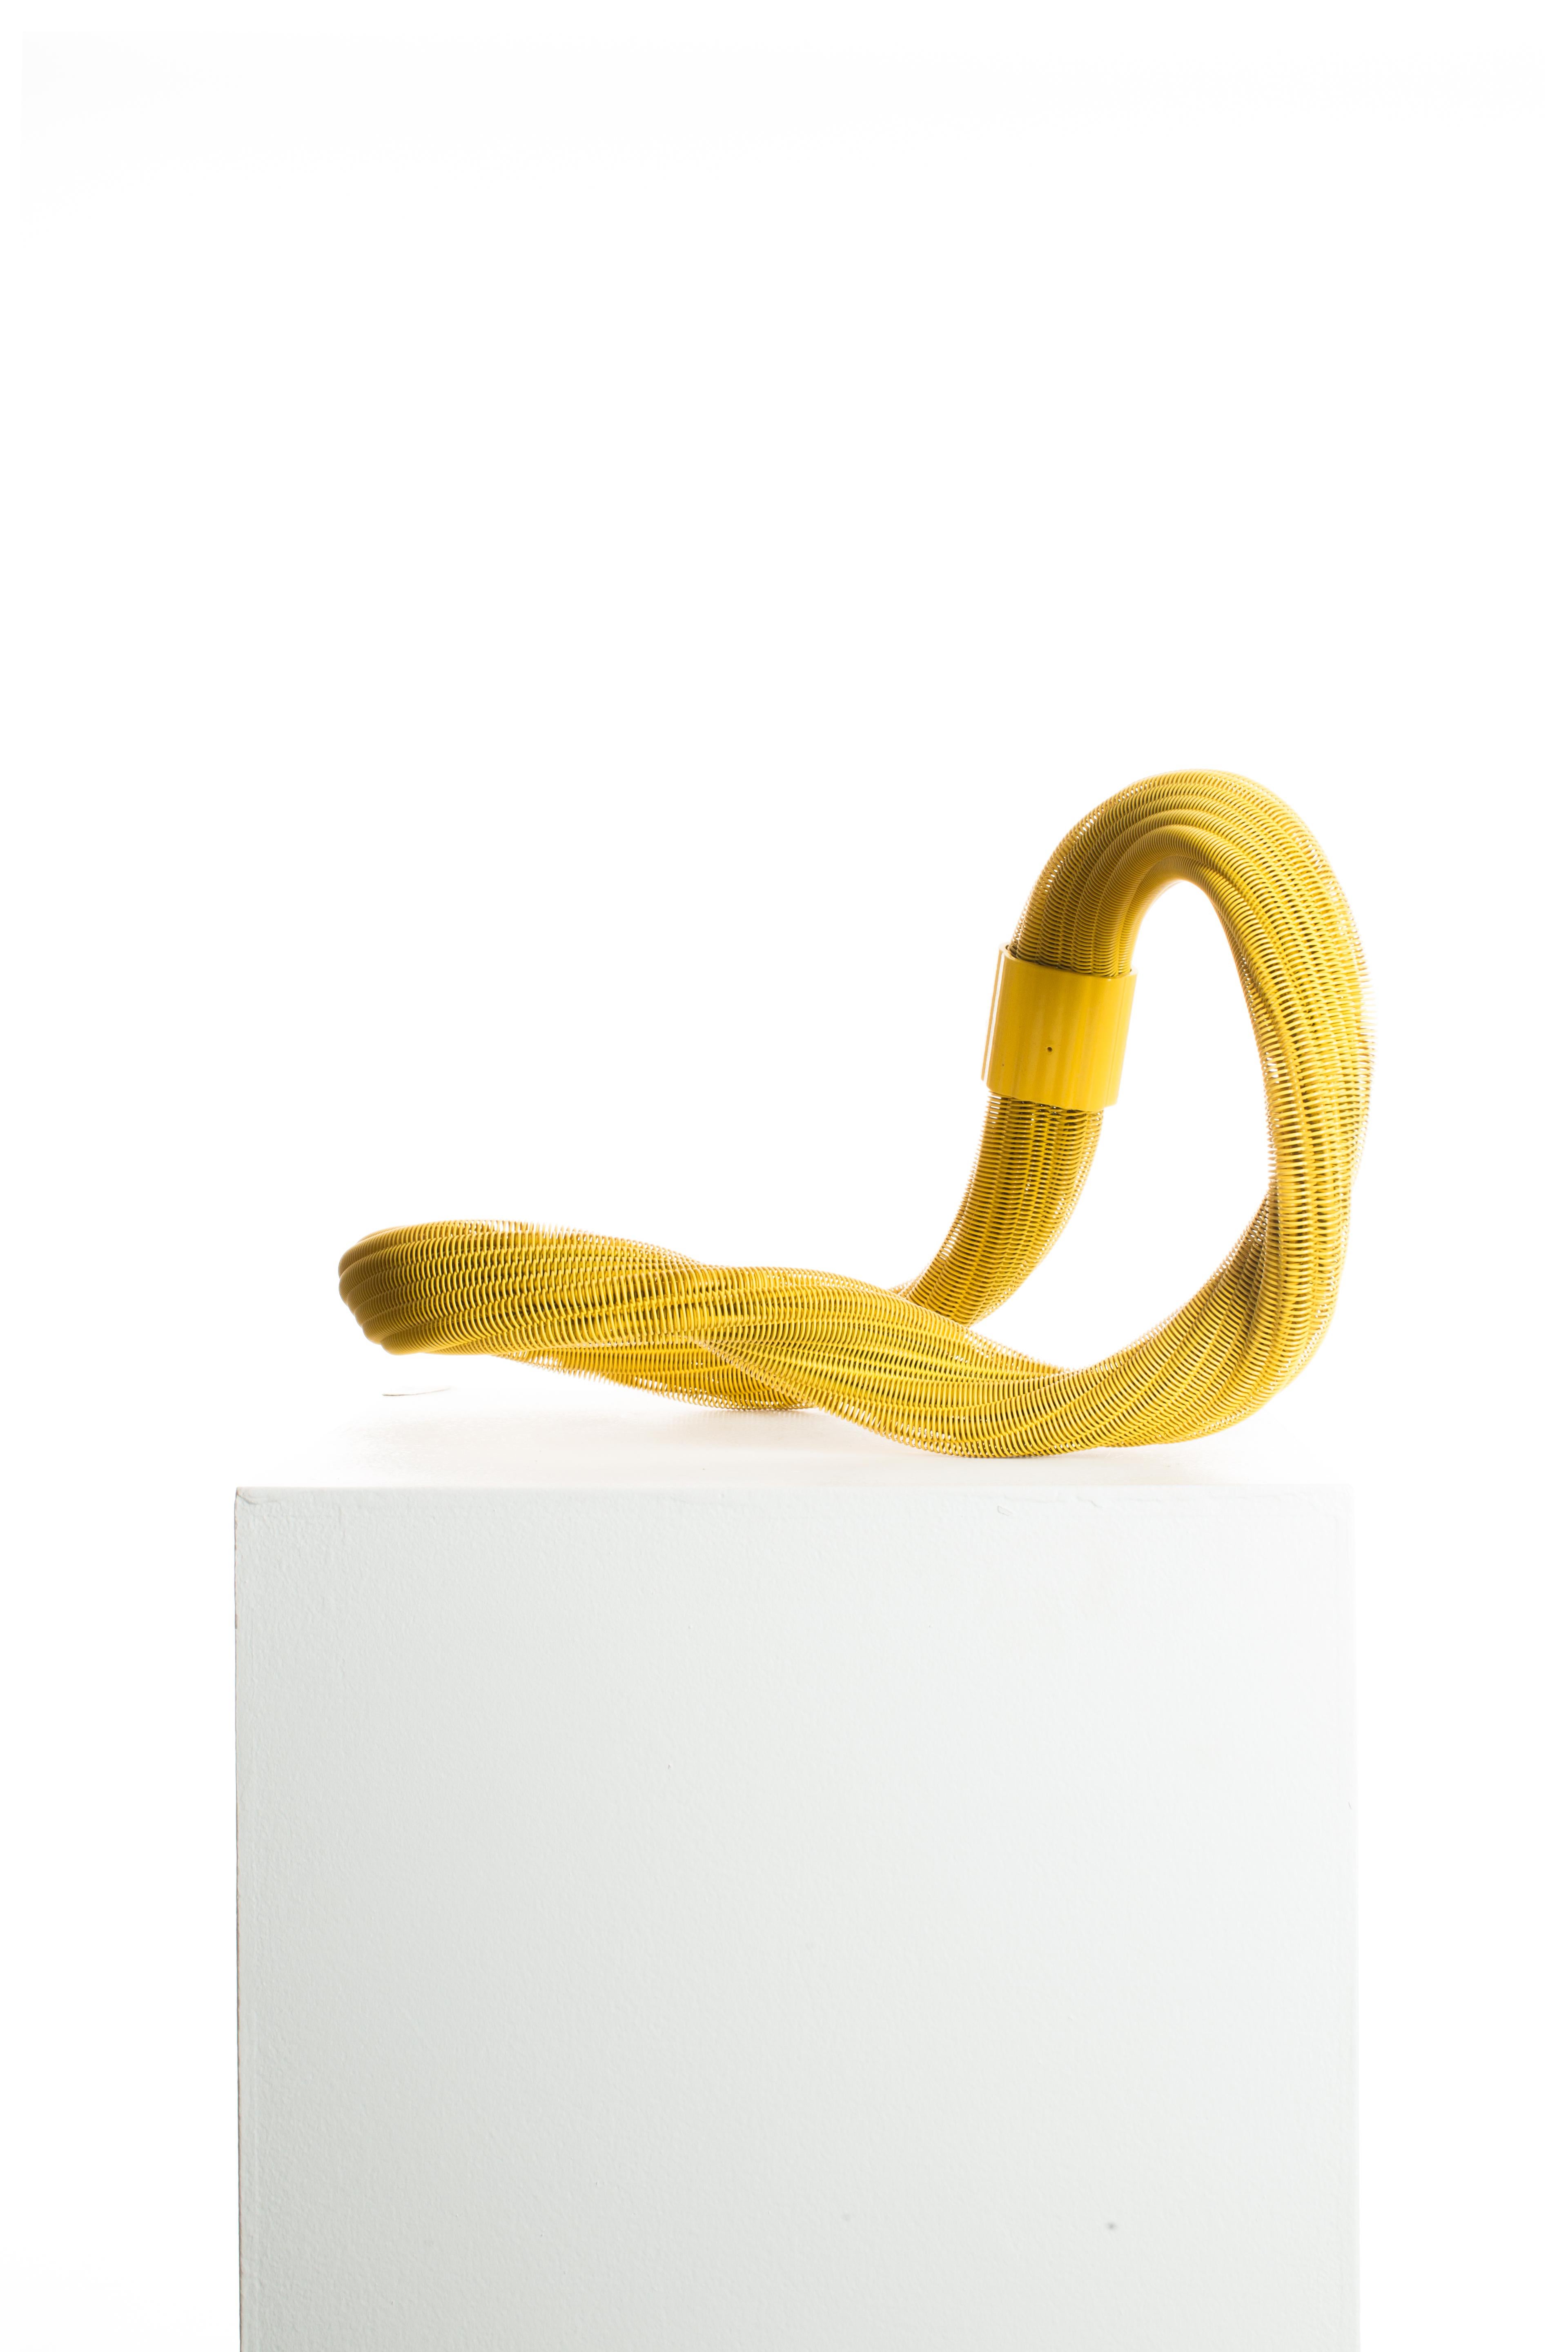 Yellow, Powder Coating, Wire, Steel, Abstract, Contemporary, Modern, Sculpture 1